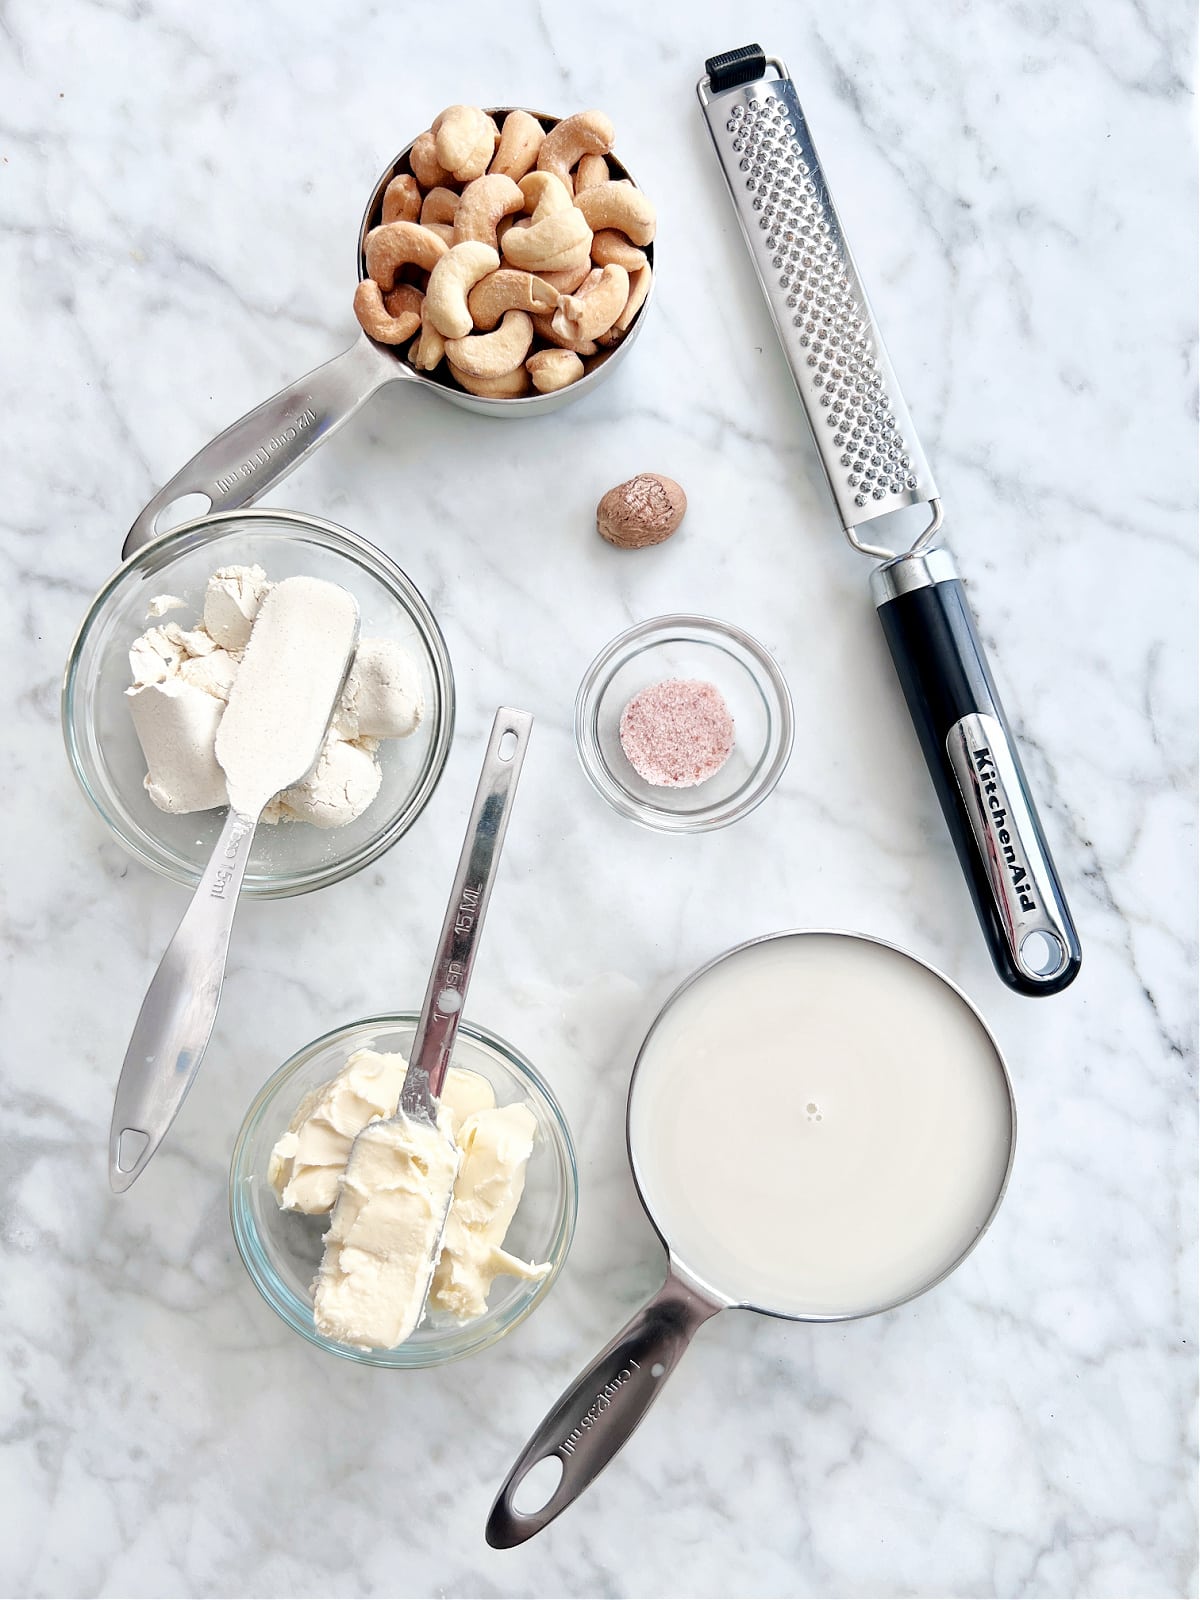 Overhead view of ingredients for cashew bechamel sauce: a measuring cup of cashews, a glass bowl of flour, a glass bowl of butter, a pinch bowl of sea salt, a measuring cup of dairy free milk, a nutmeg pod and grater.